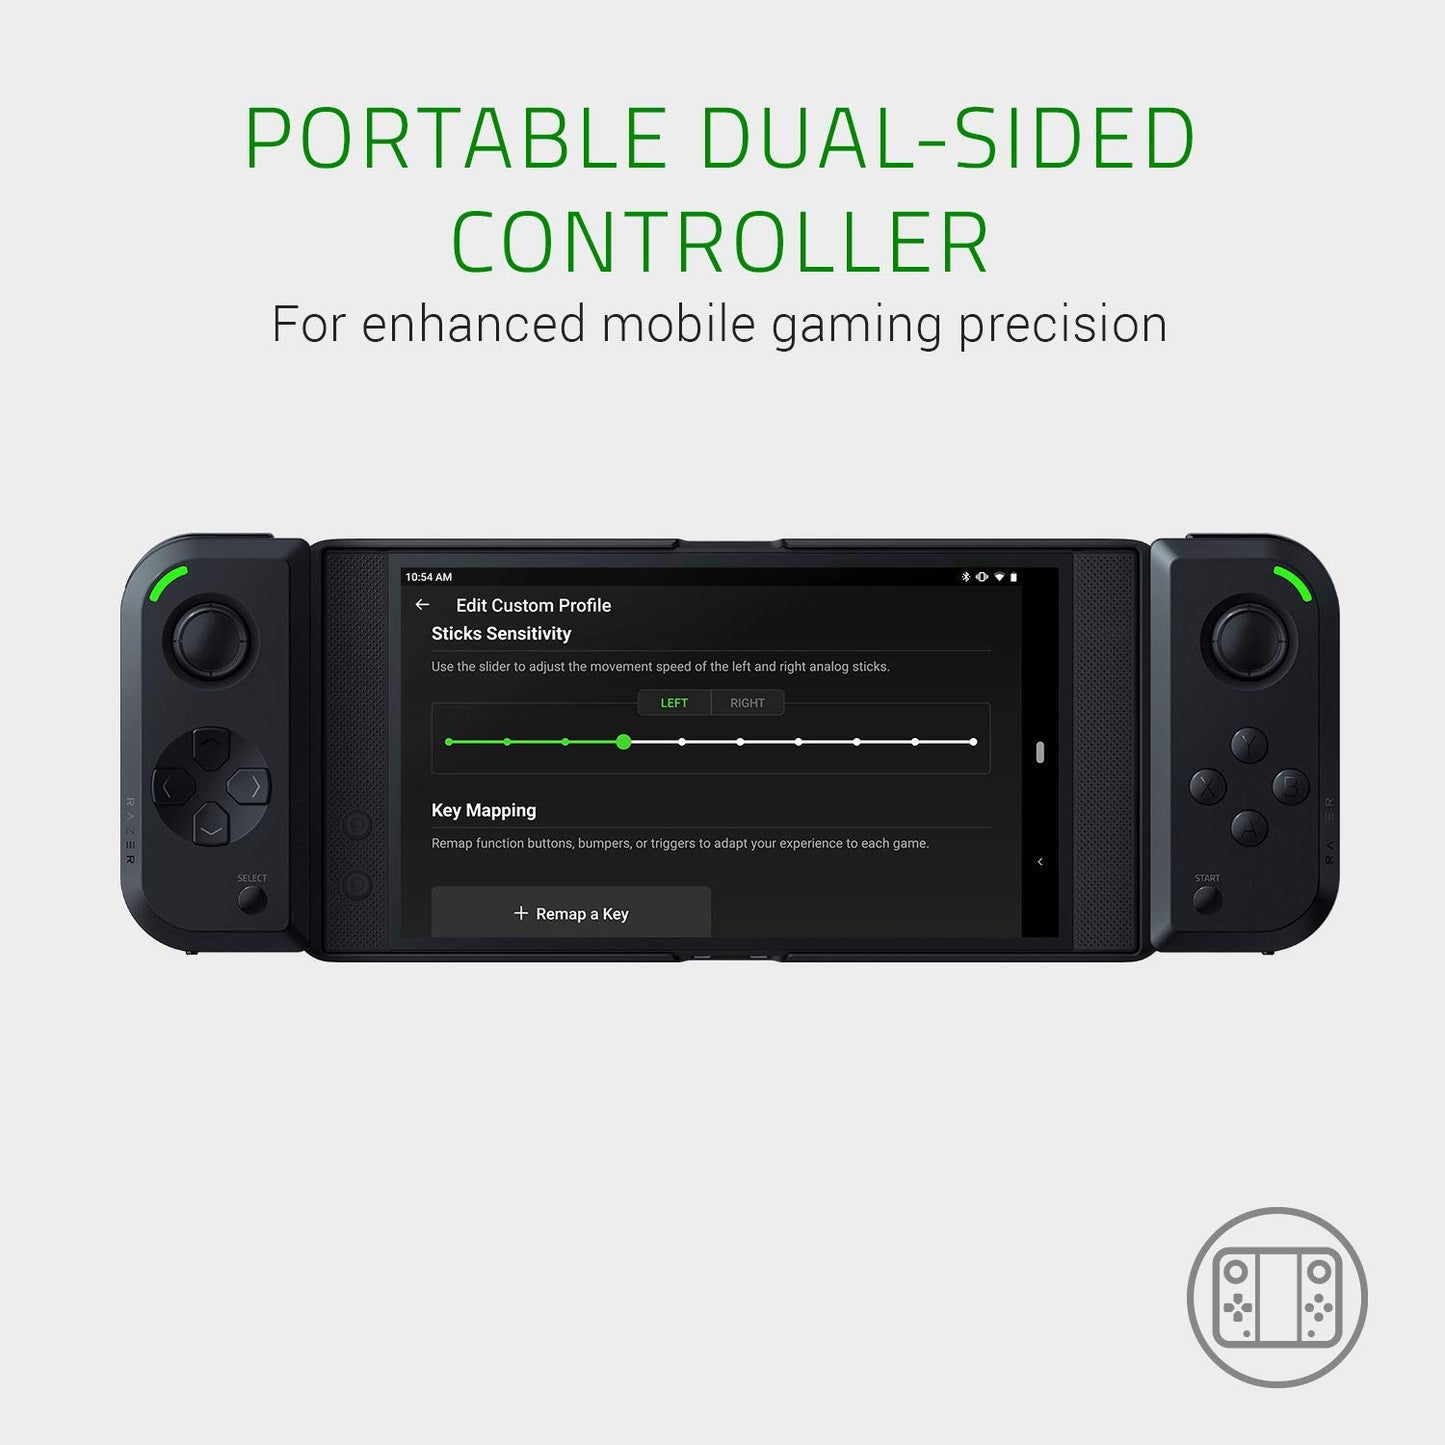 Razer Junglecat Dual-Sided Mobile Game Controller for Android: Modular Design - 100 Hr Battery Life - Bluetooth Low-Latency - Compatible w/ Razer Phone 2, Galaxy Note 9, Galaxy S10+